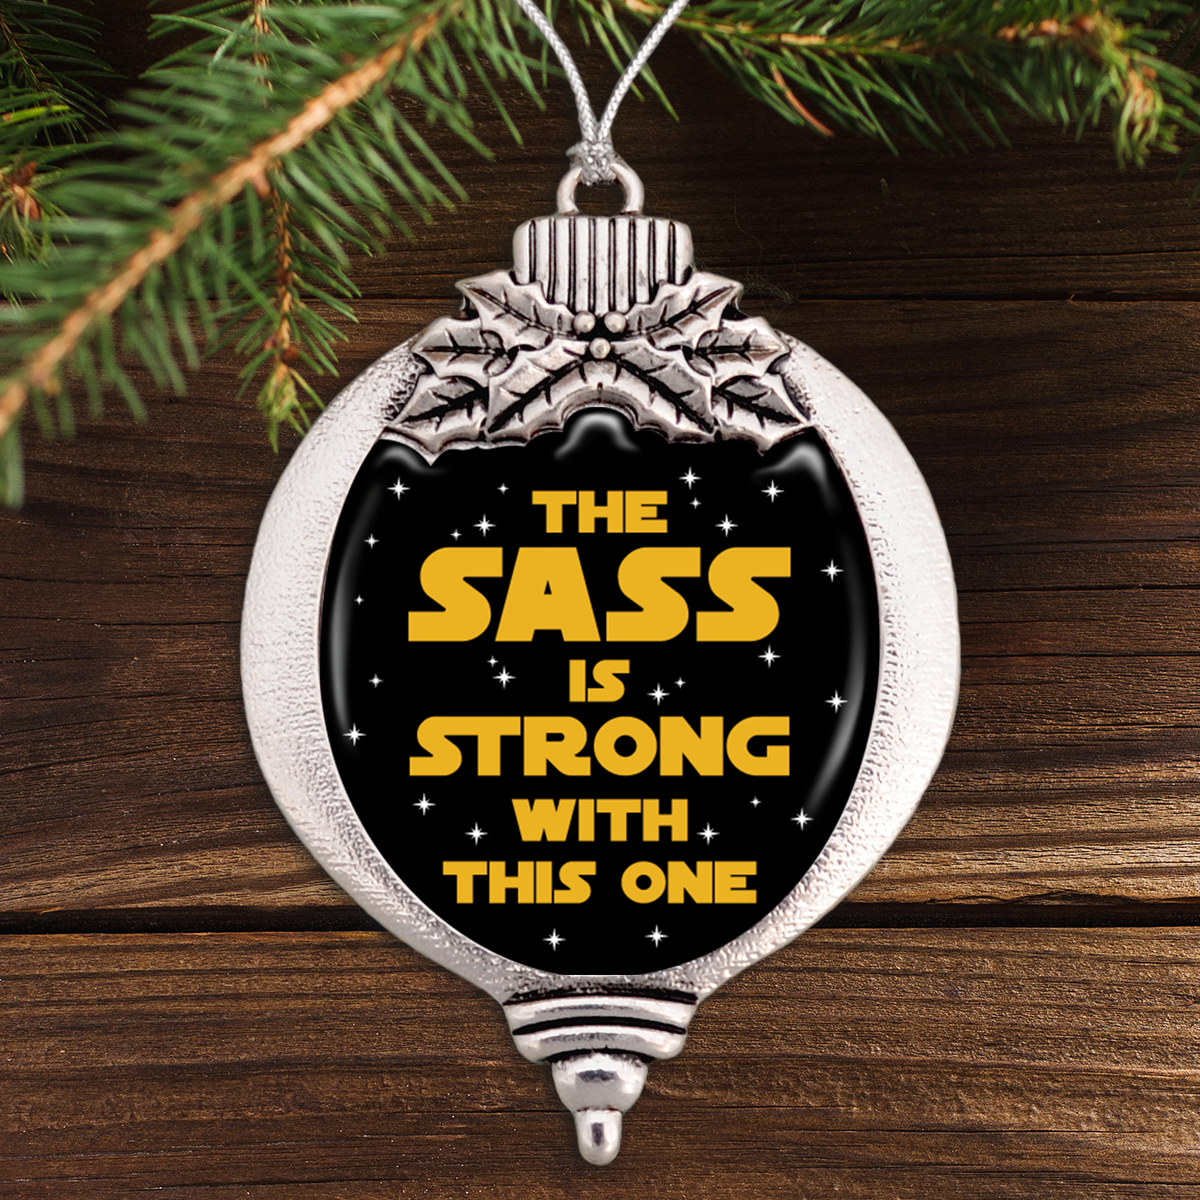 The Sass Is Strong With This One Bulb Ornament